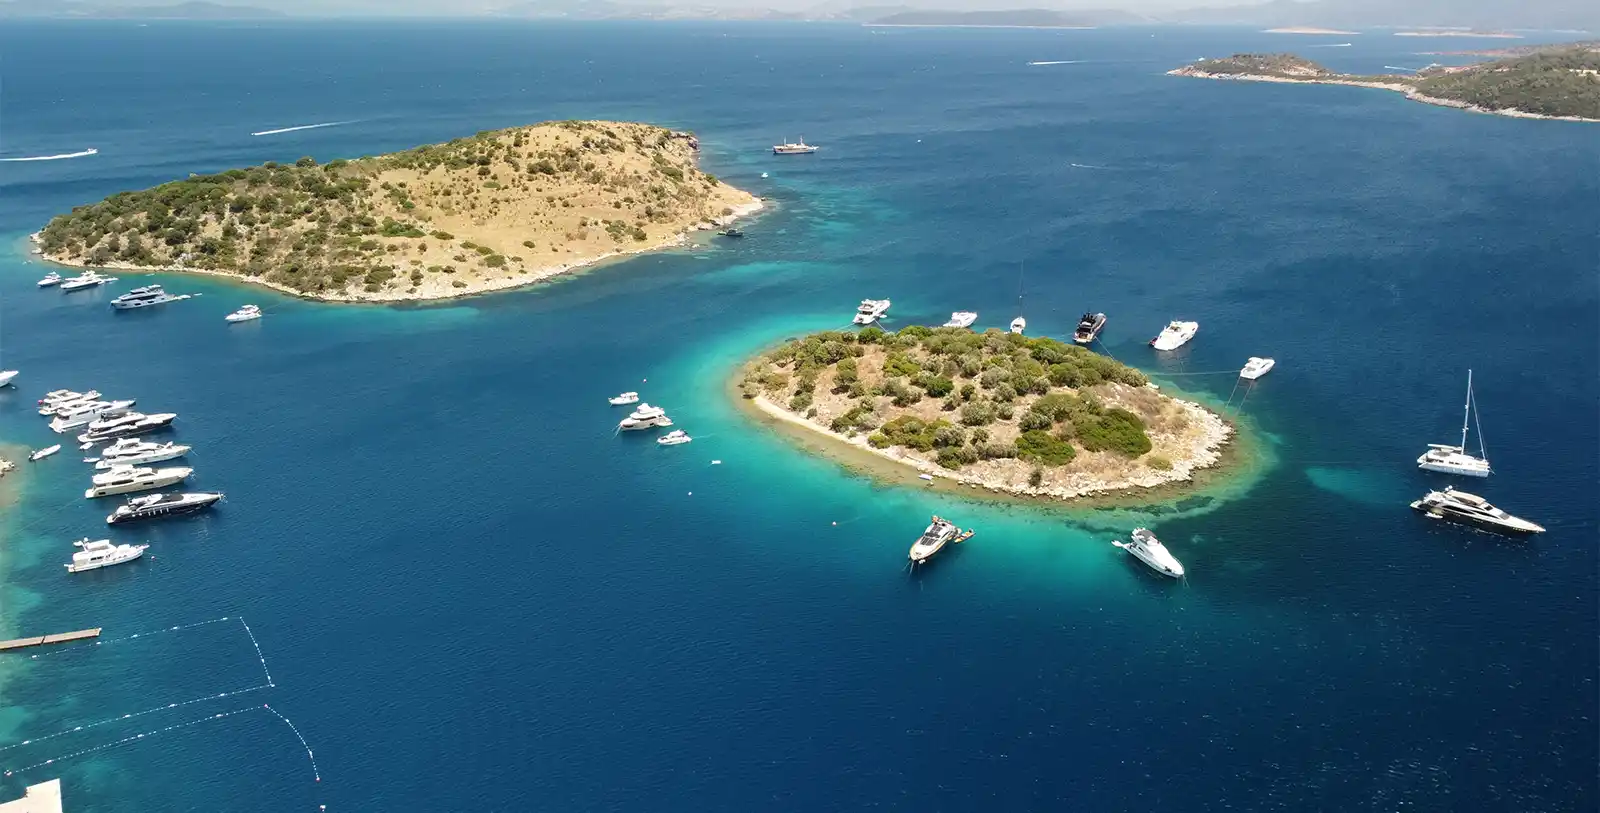 You can enjoy a boat ride in Bodrum. Some islands close to Bodrum's shores.